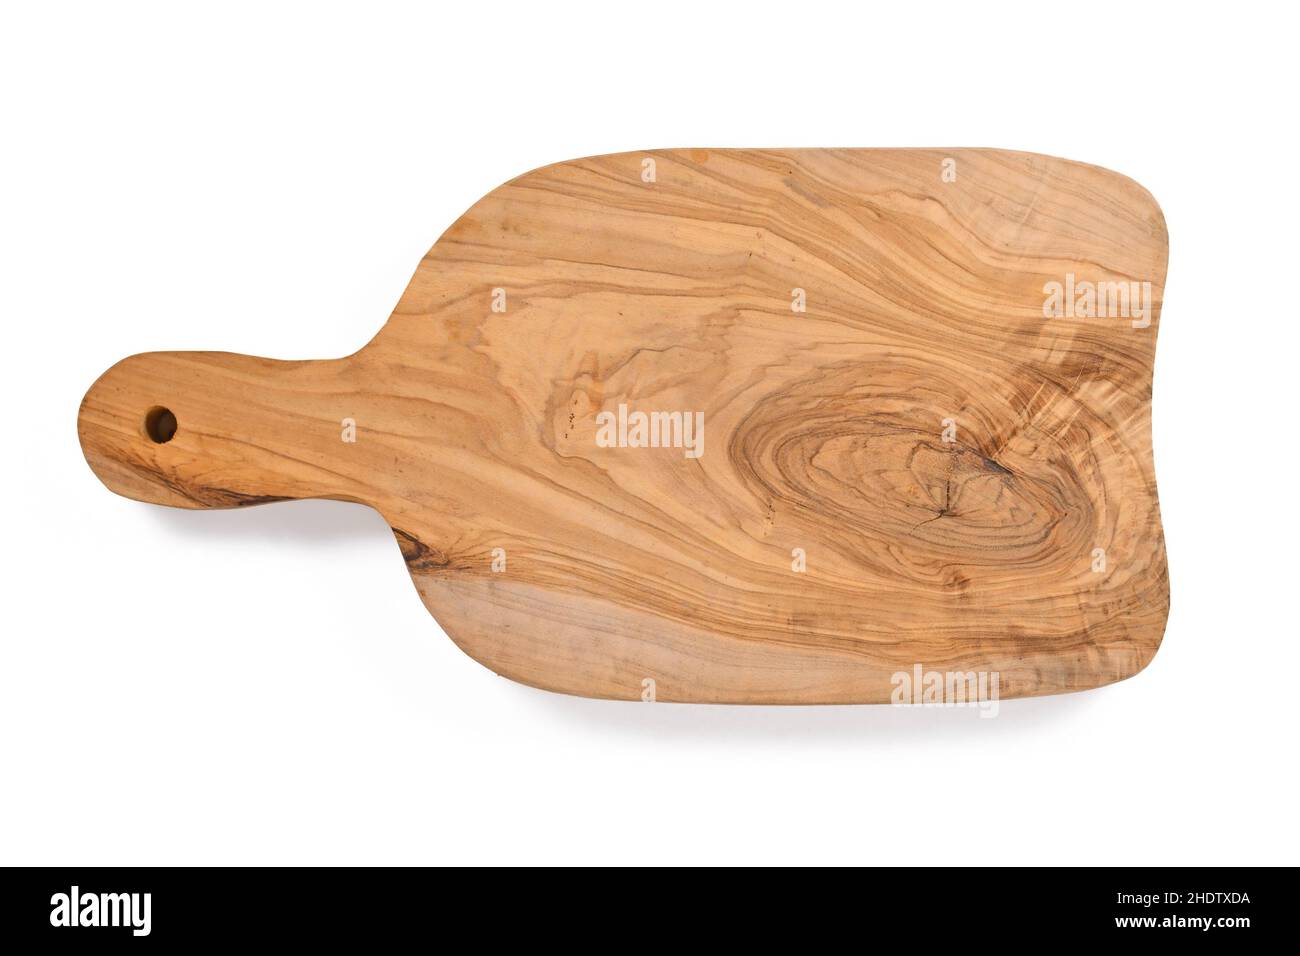 Top view of cutting board made from olive tree wood on white background Stock Photo